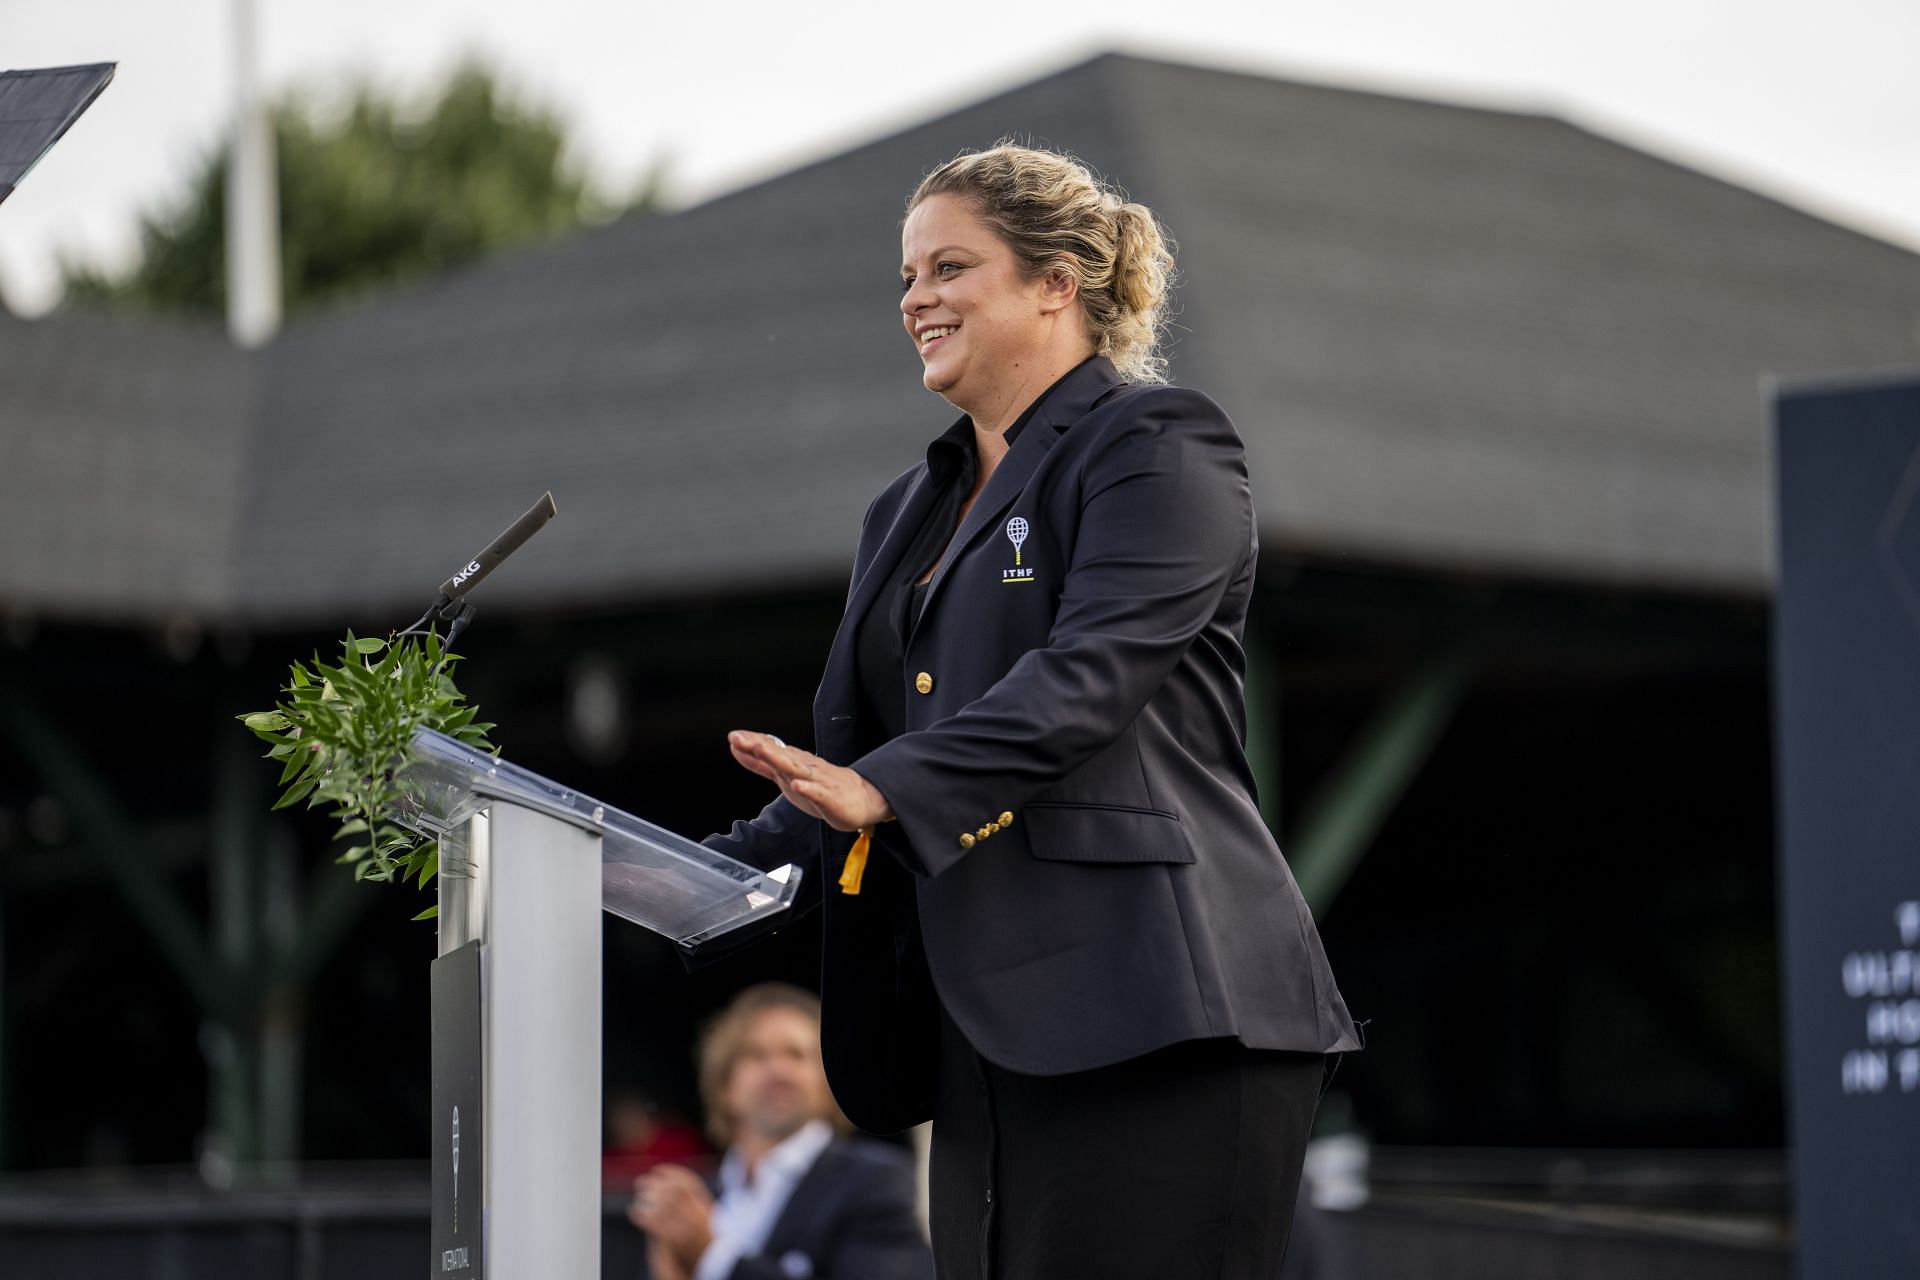 Kim Clijsters at the International Tennis Hall of Fame 2023 Induction Ceremony